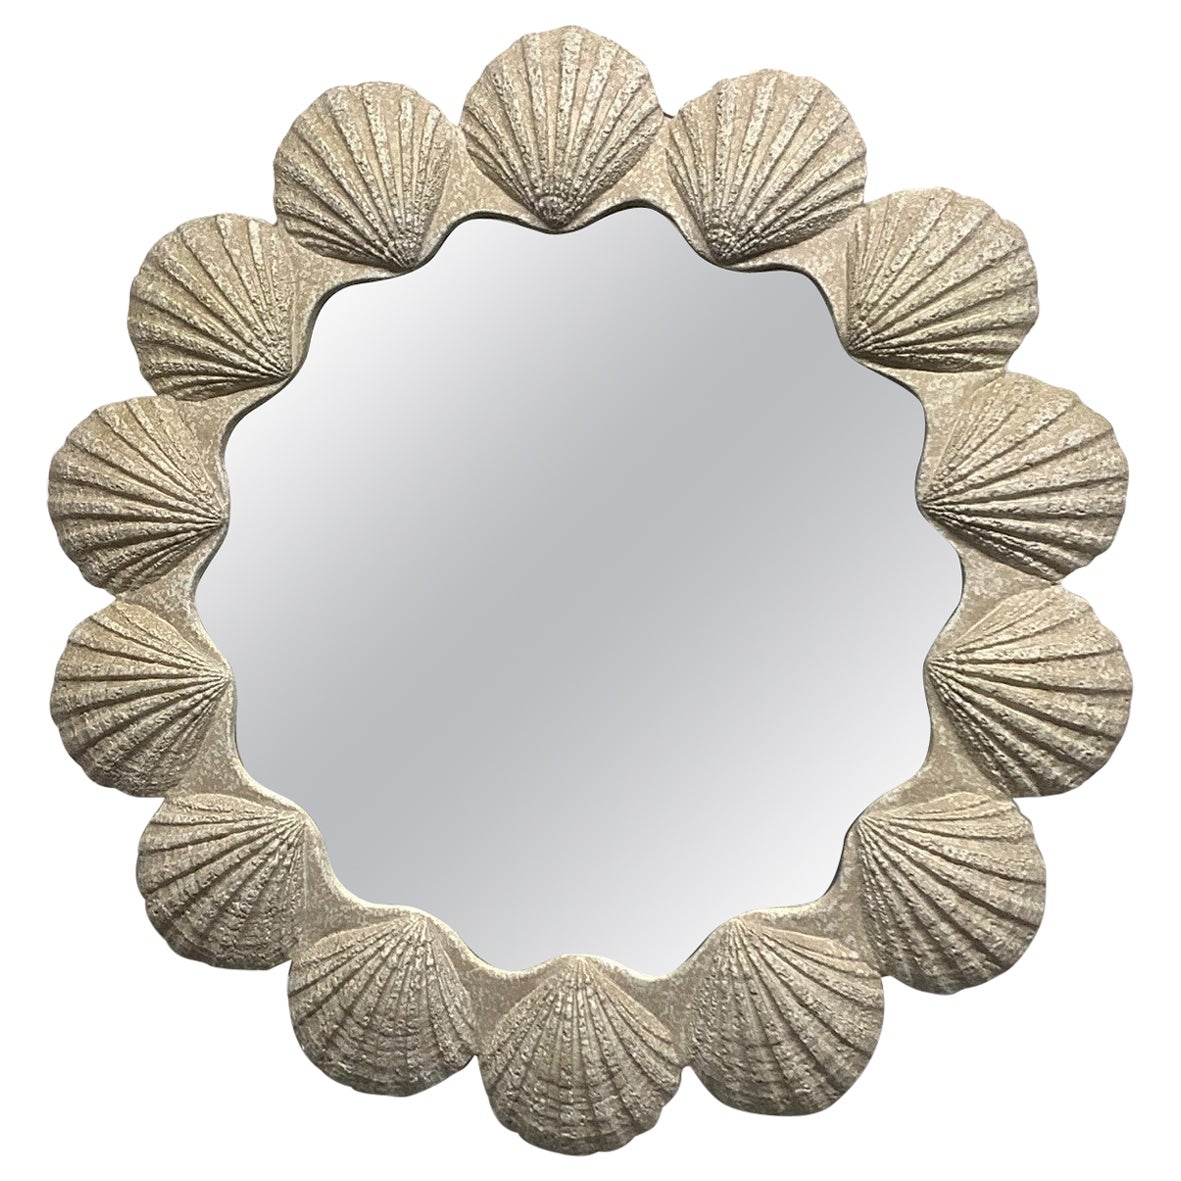 Large Plaster Shell Form Mirror